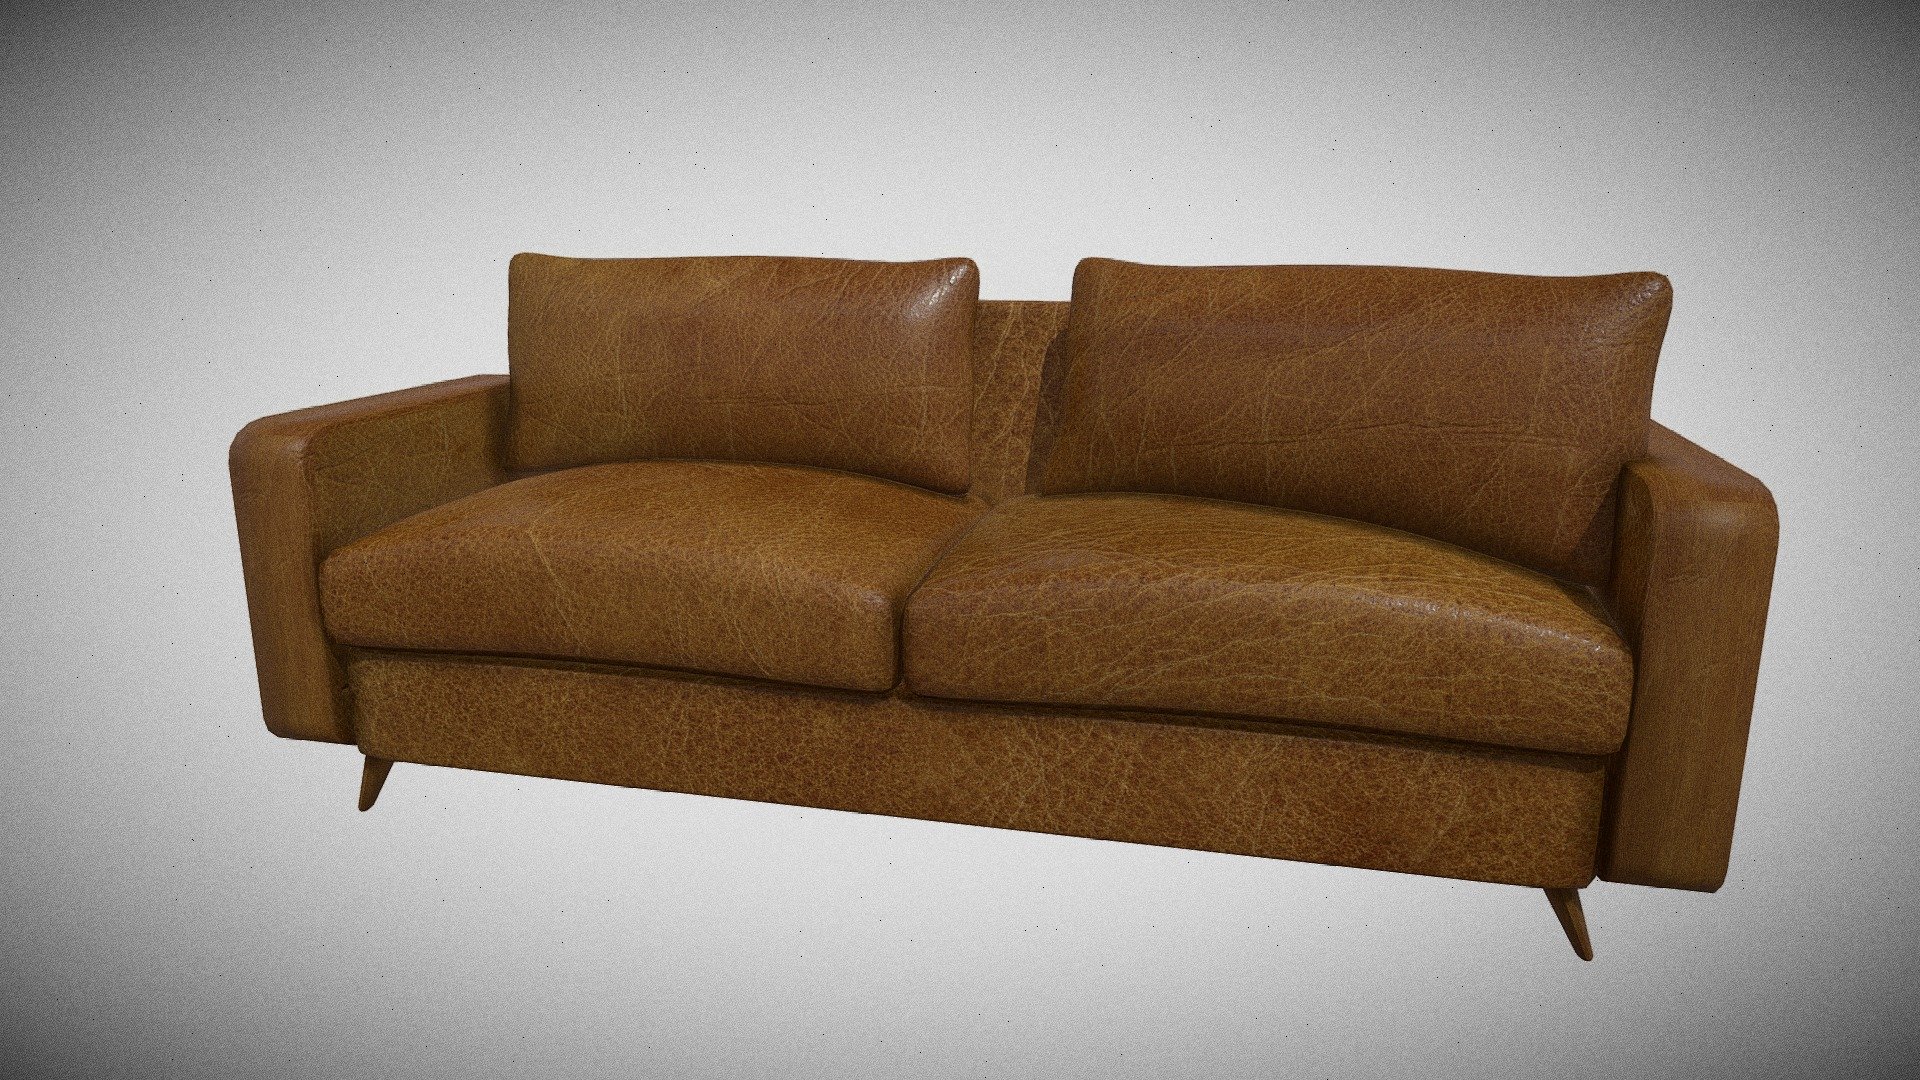 hello, good evening, this is a Sofa Vintage, it has textures, I hope you enjoy it 3d model